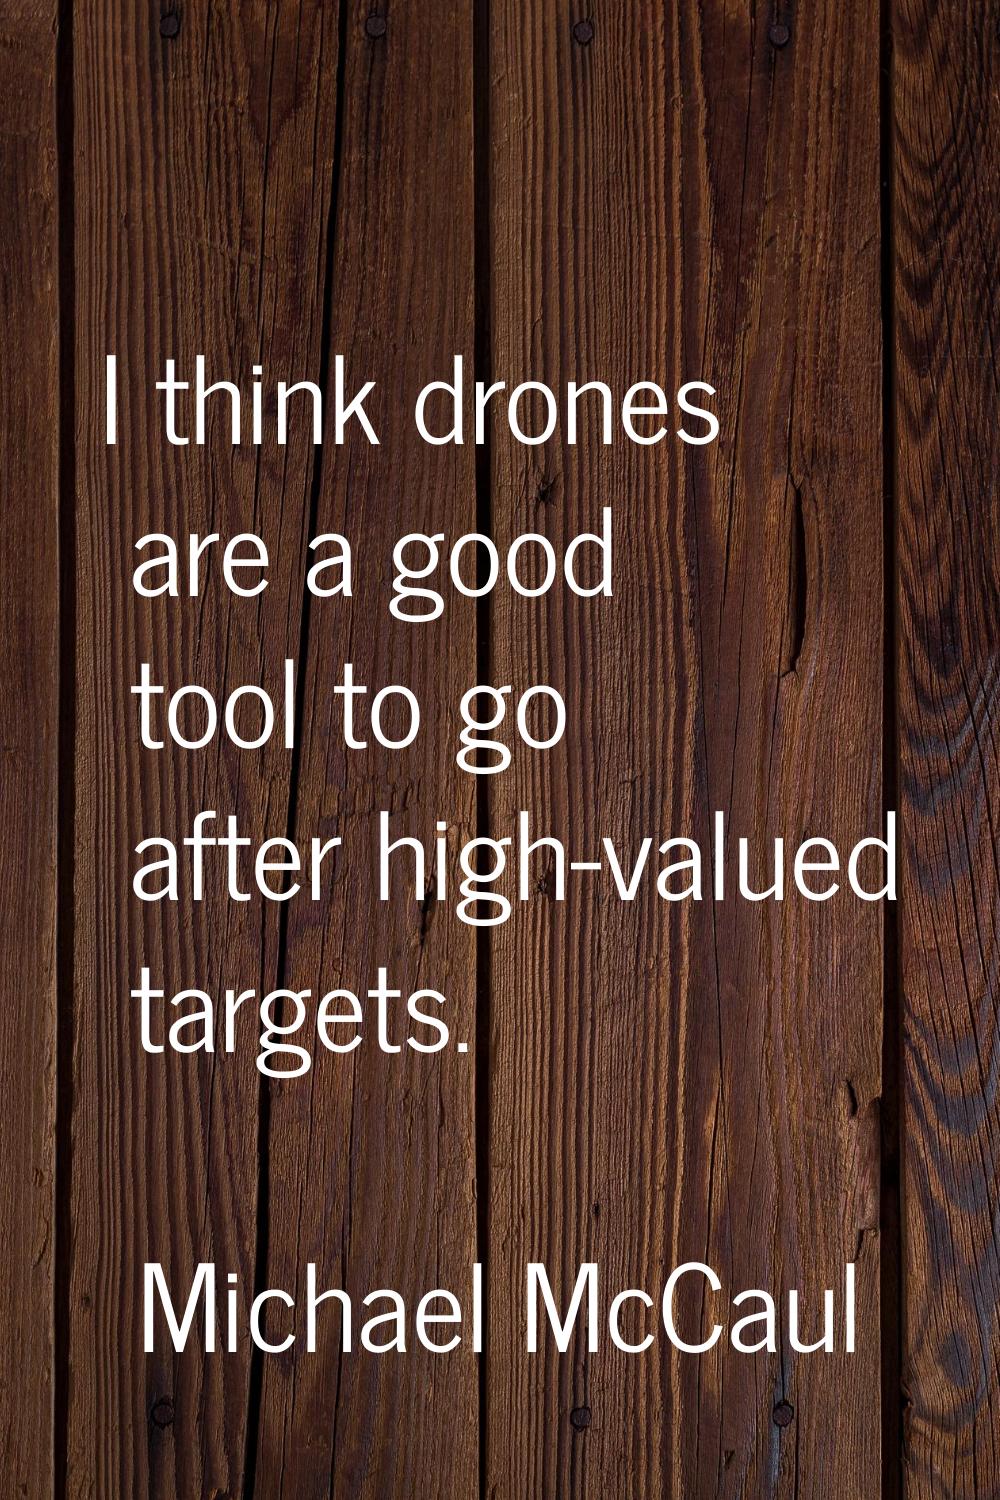 I think drones are a good tool to go after high-valued targets.